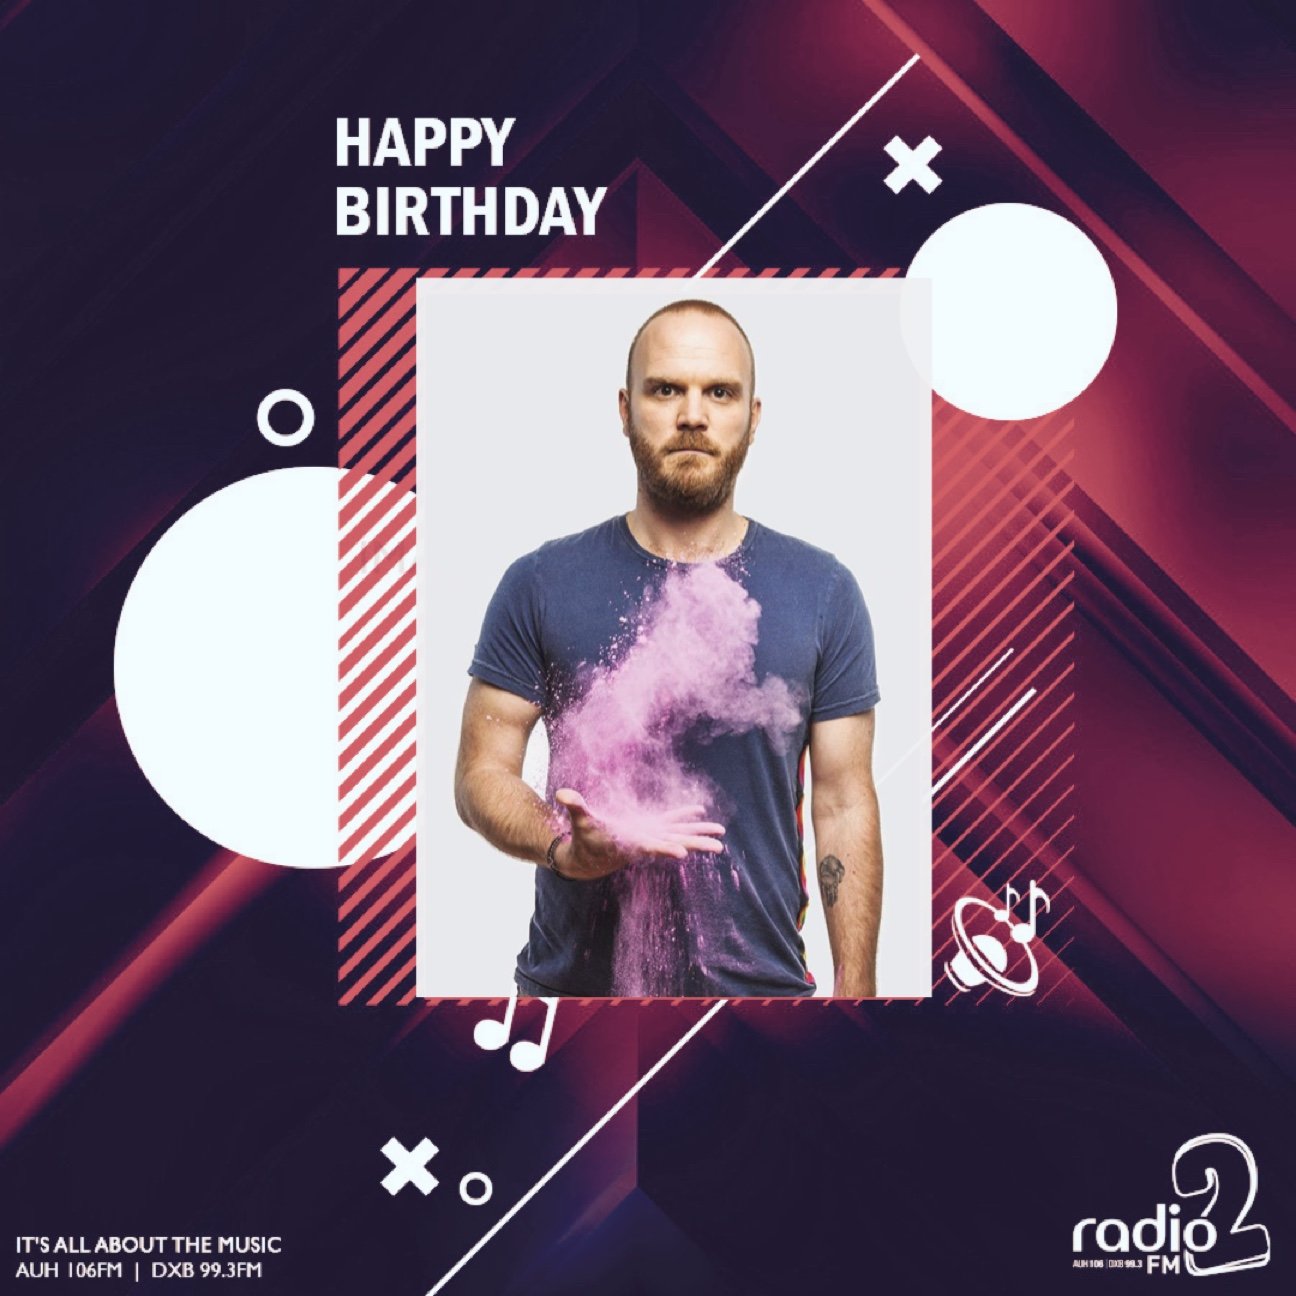 Happy birthday to the Coldplay drummer Will Champion, 41 today 